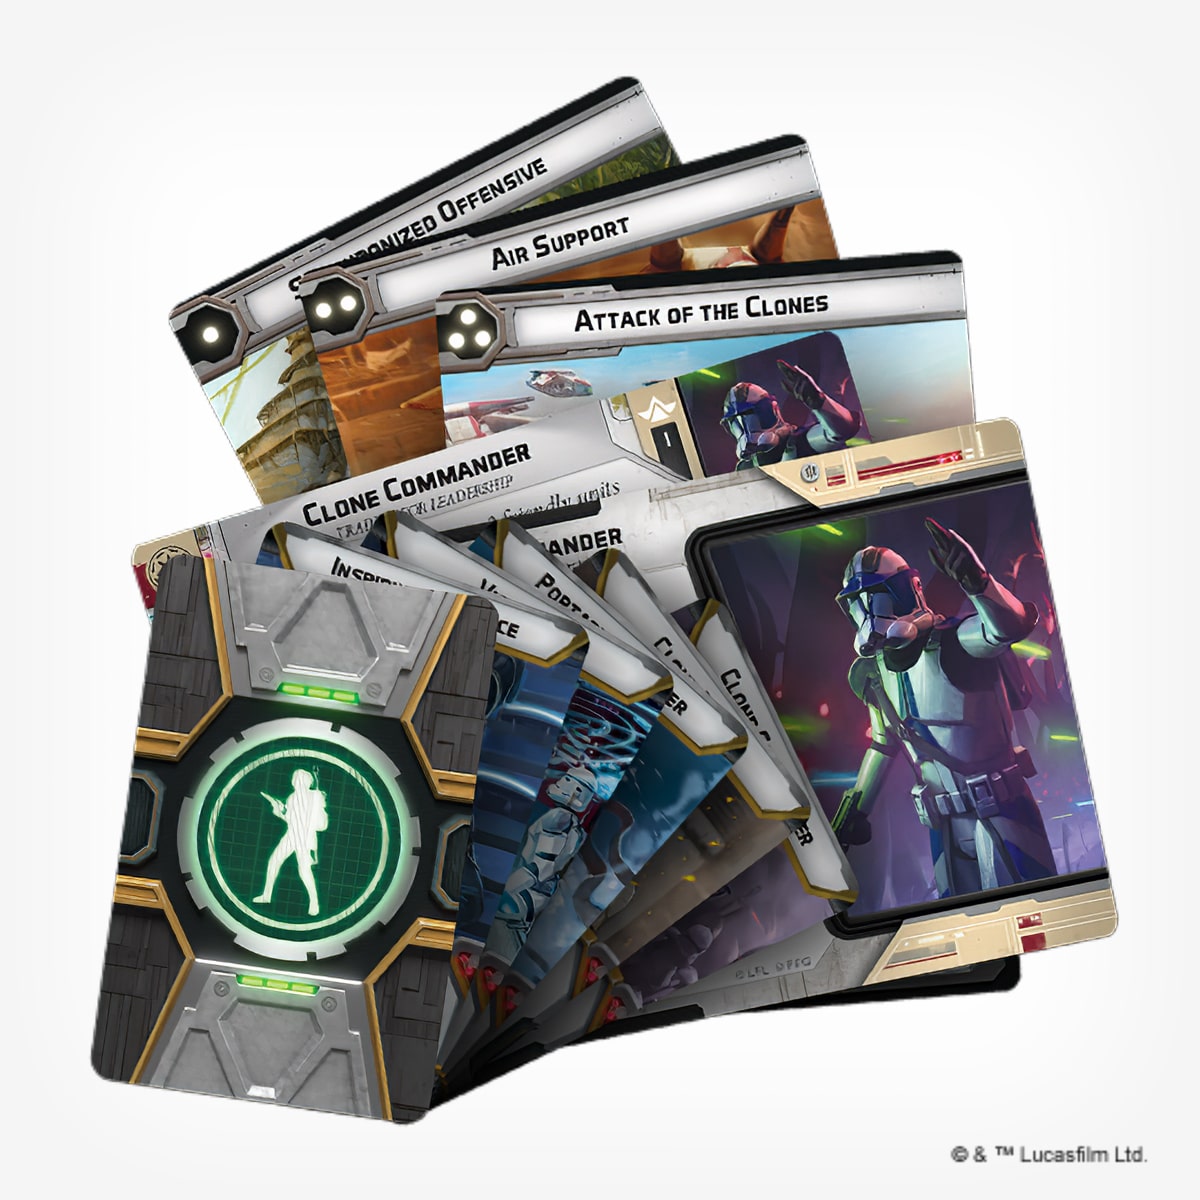 Star Wars Legion: Republic Specialists Personnel Expansion - Loaded Dice